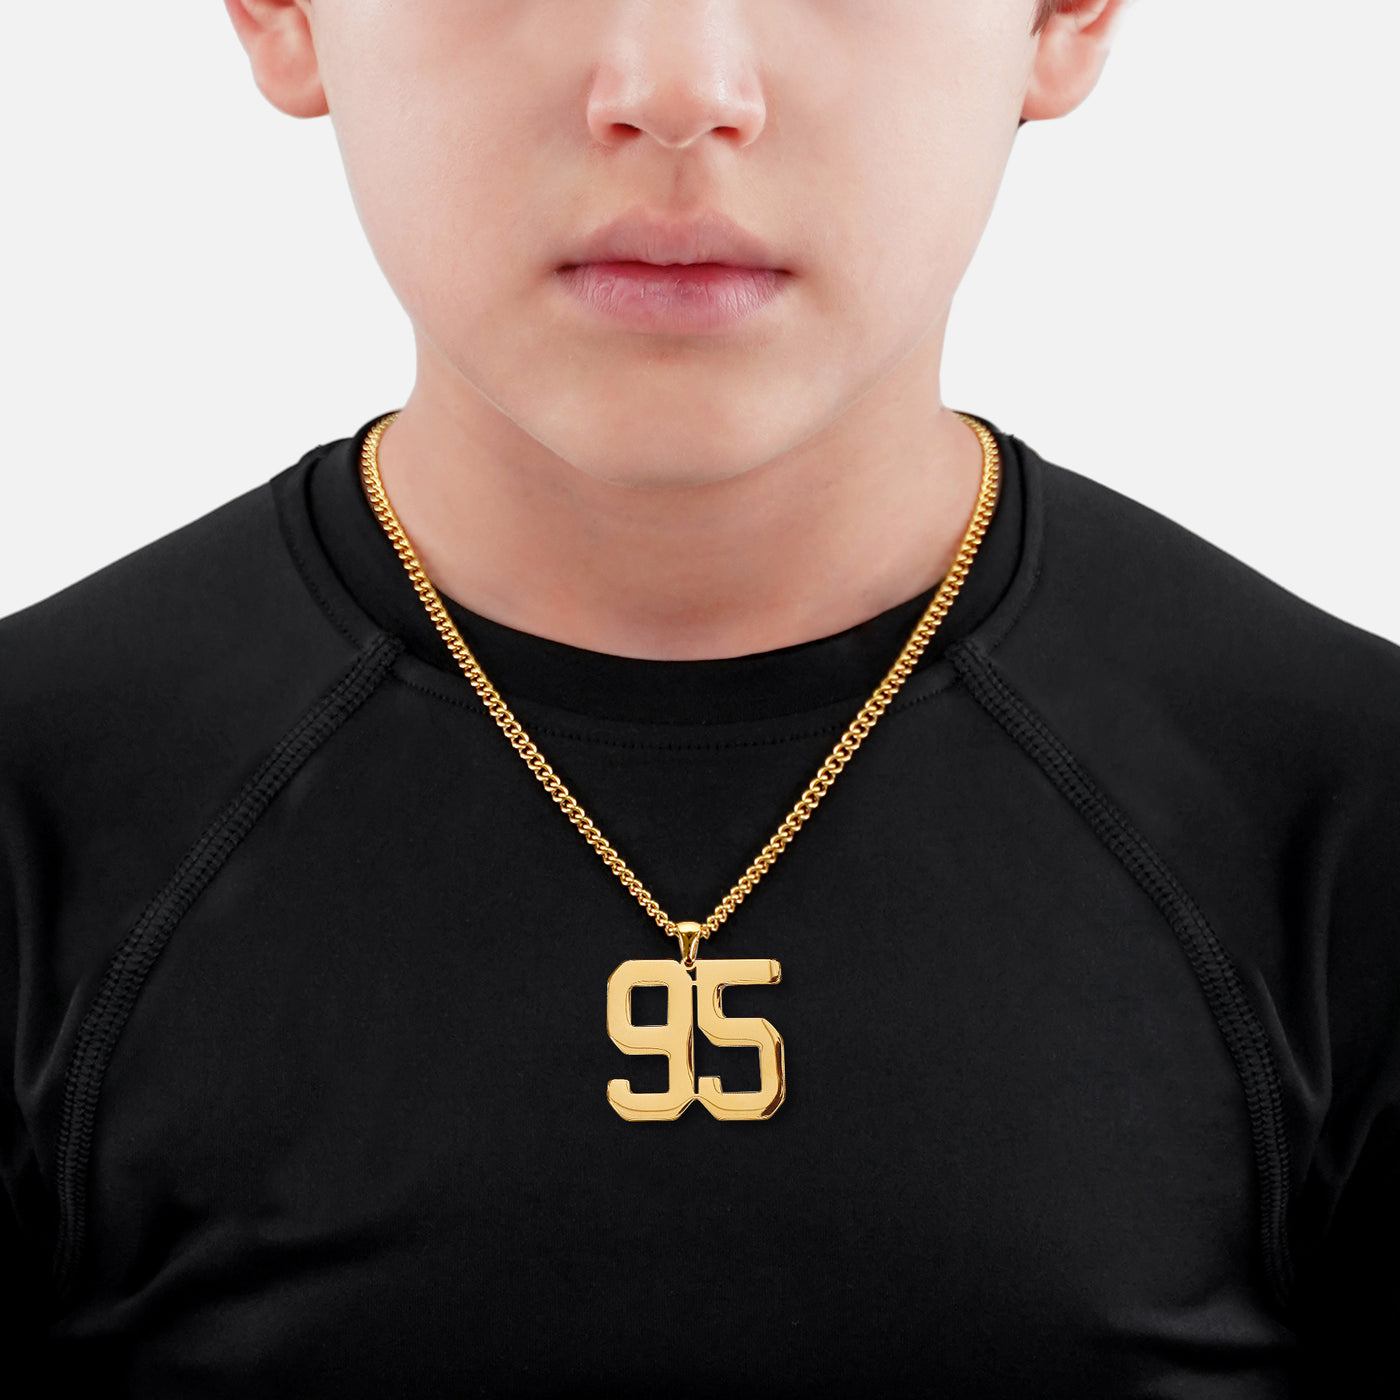 95 Number Pendant with Chain Kids Necklace - Gold Plated Stainless Steel